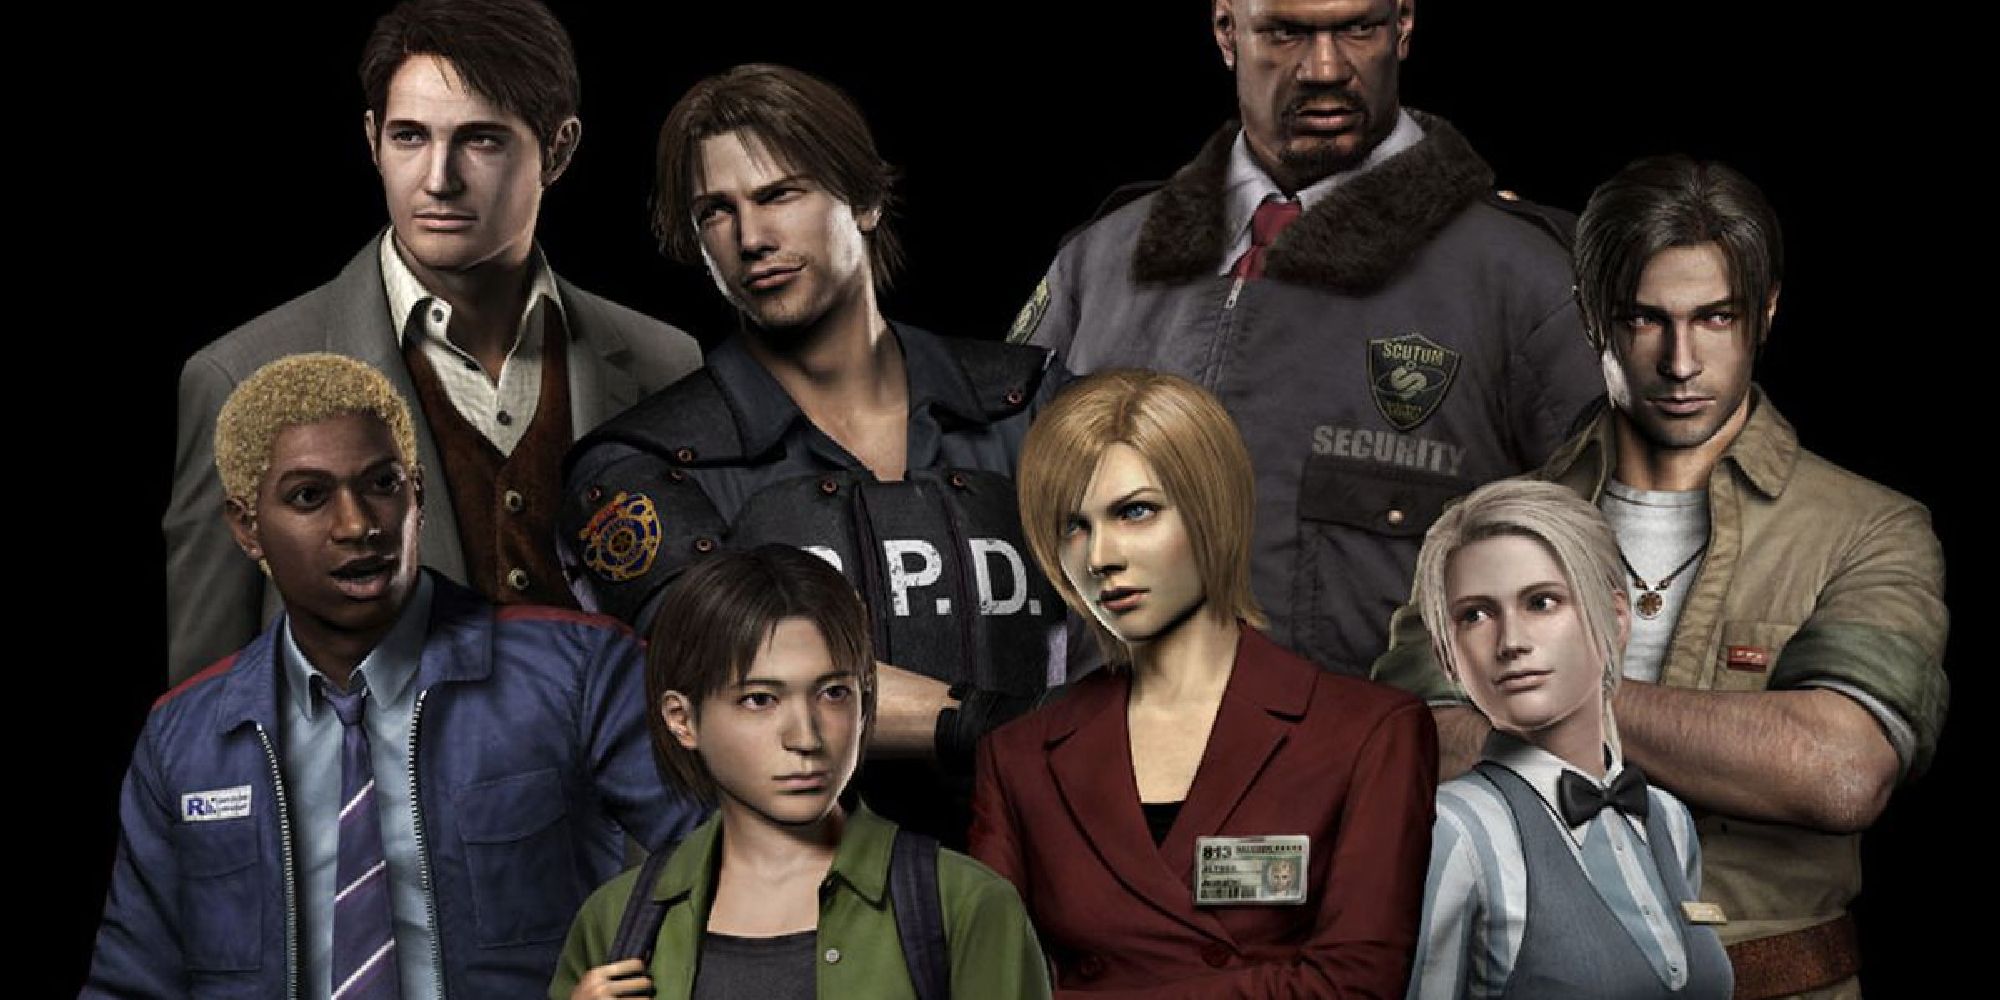 The cast of characters from Resident Evil Outbreak.